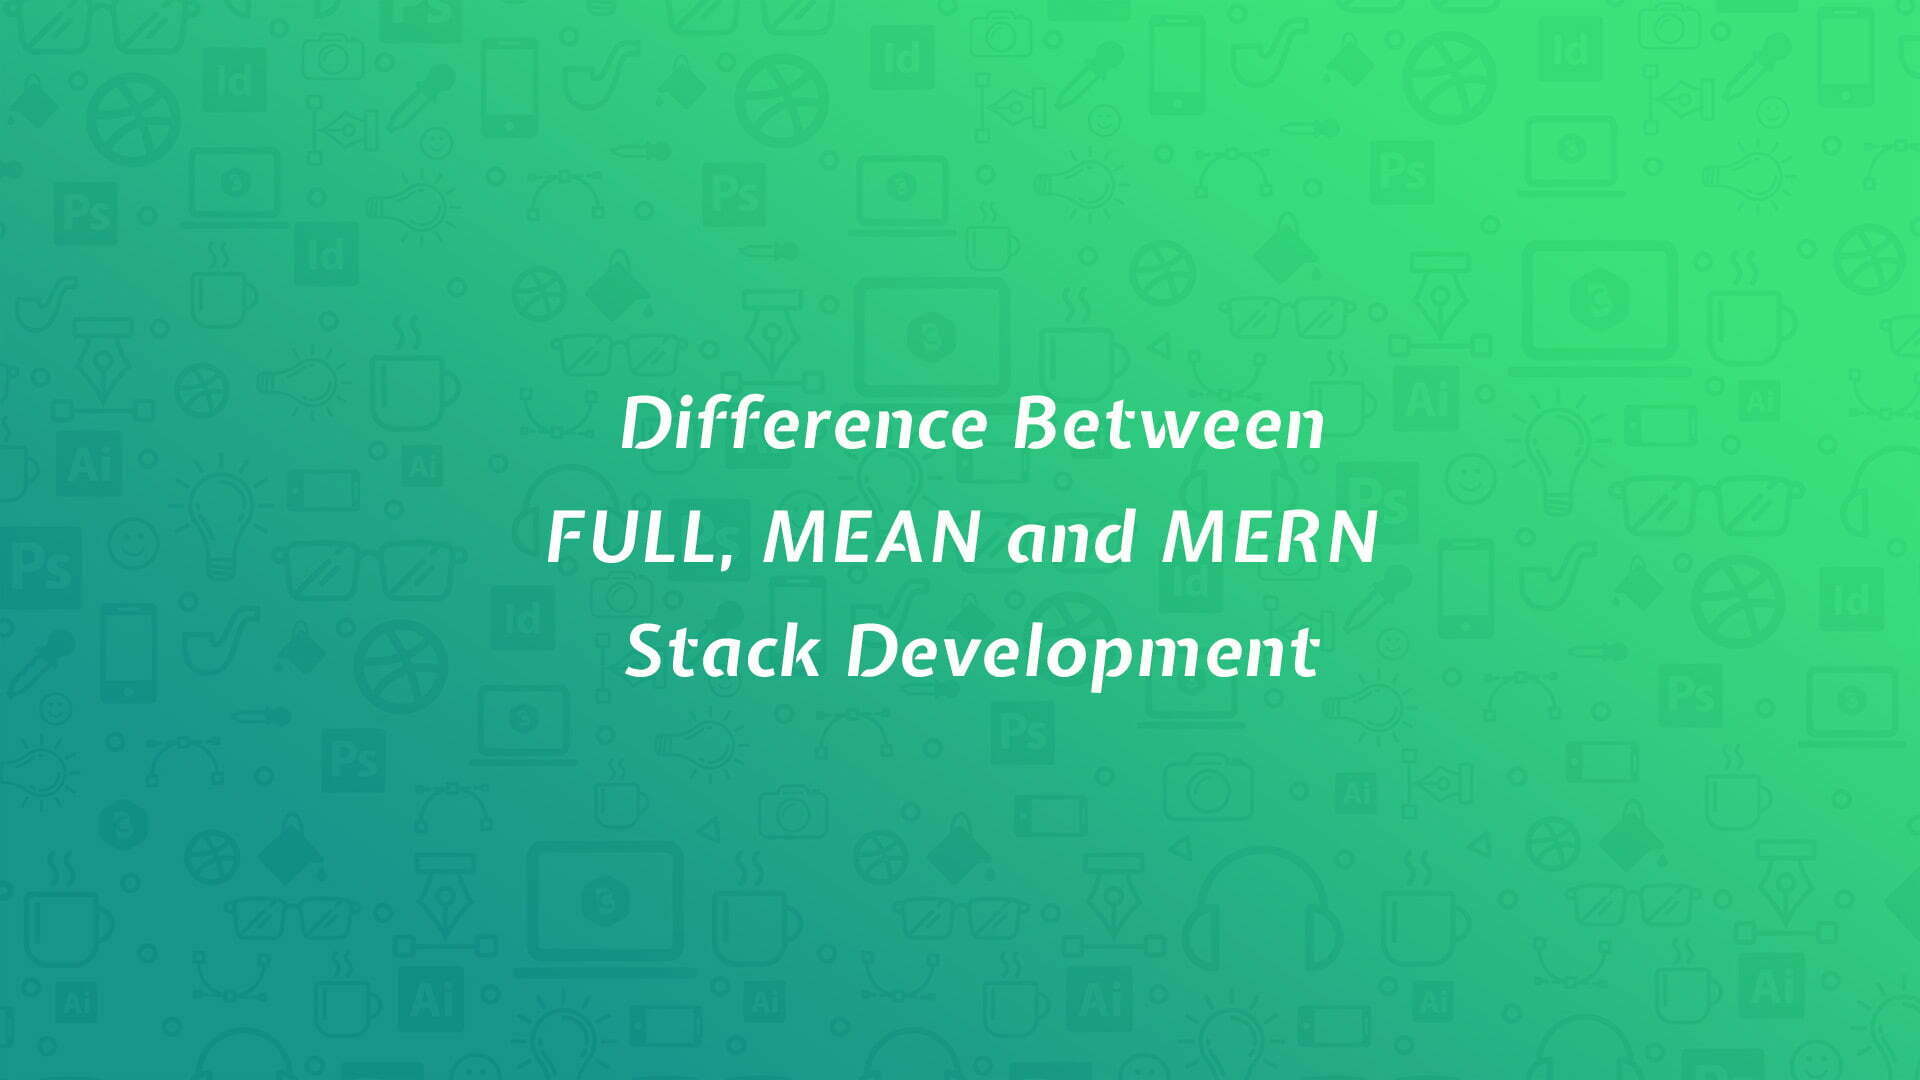 Difference Between FULL, MEAN and MERN Stack Development